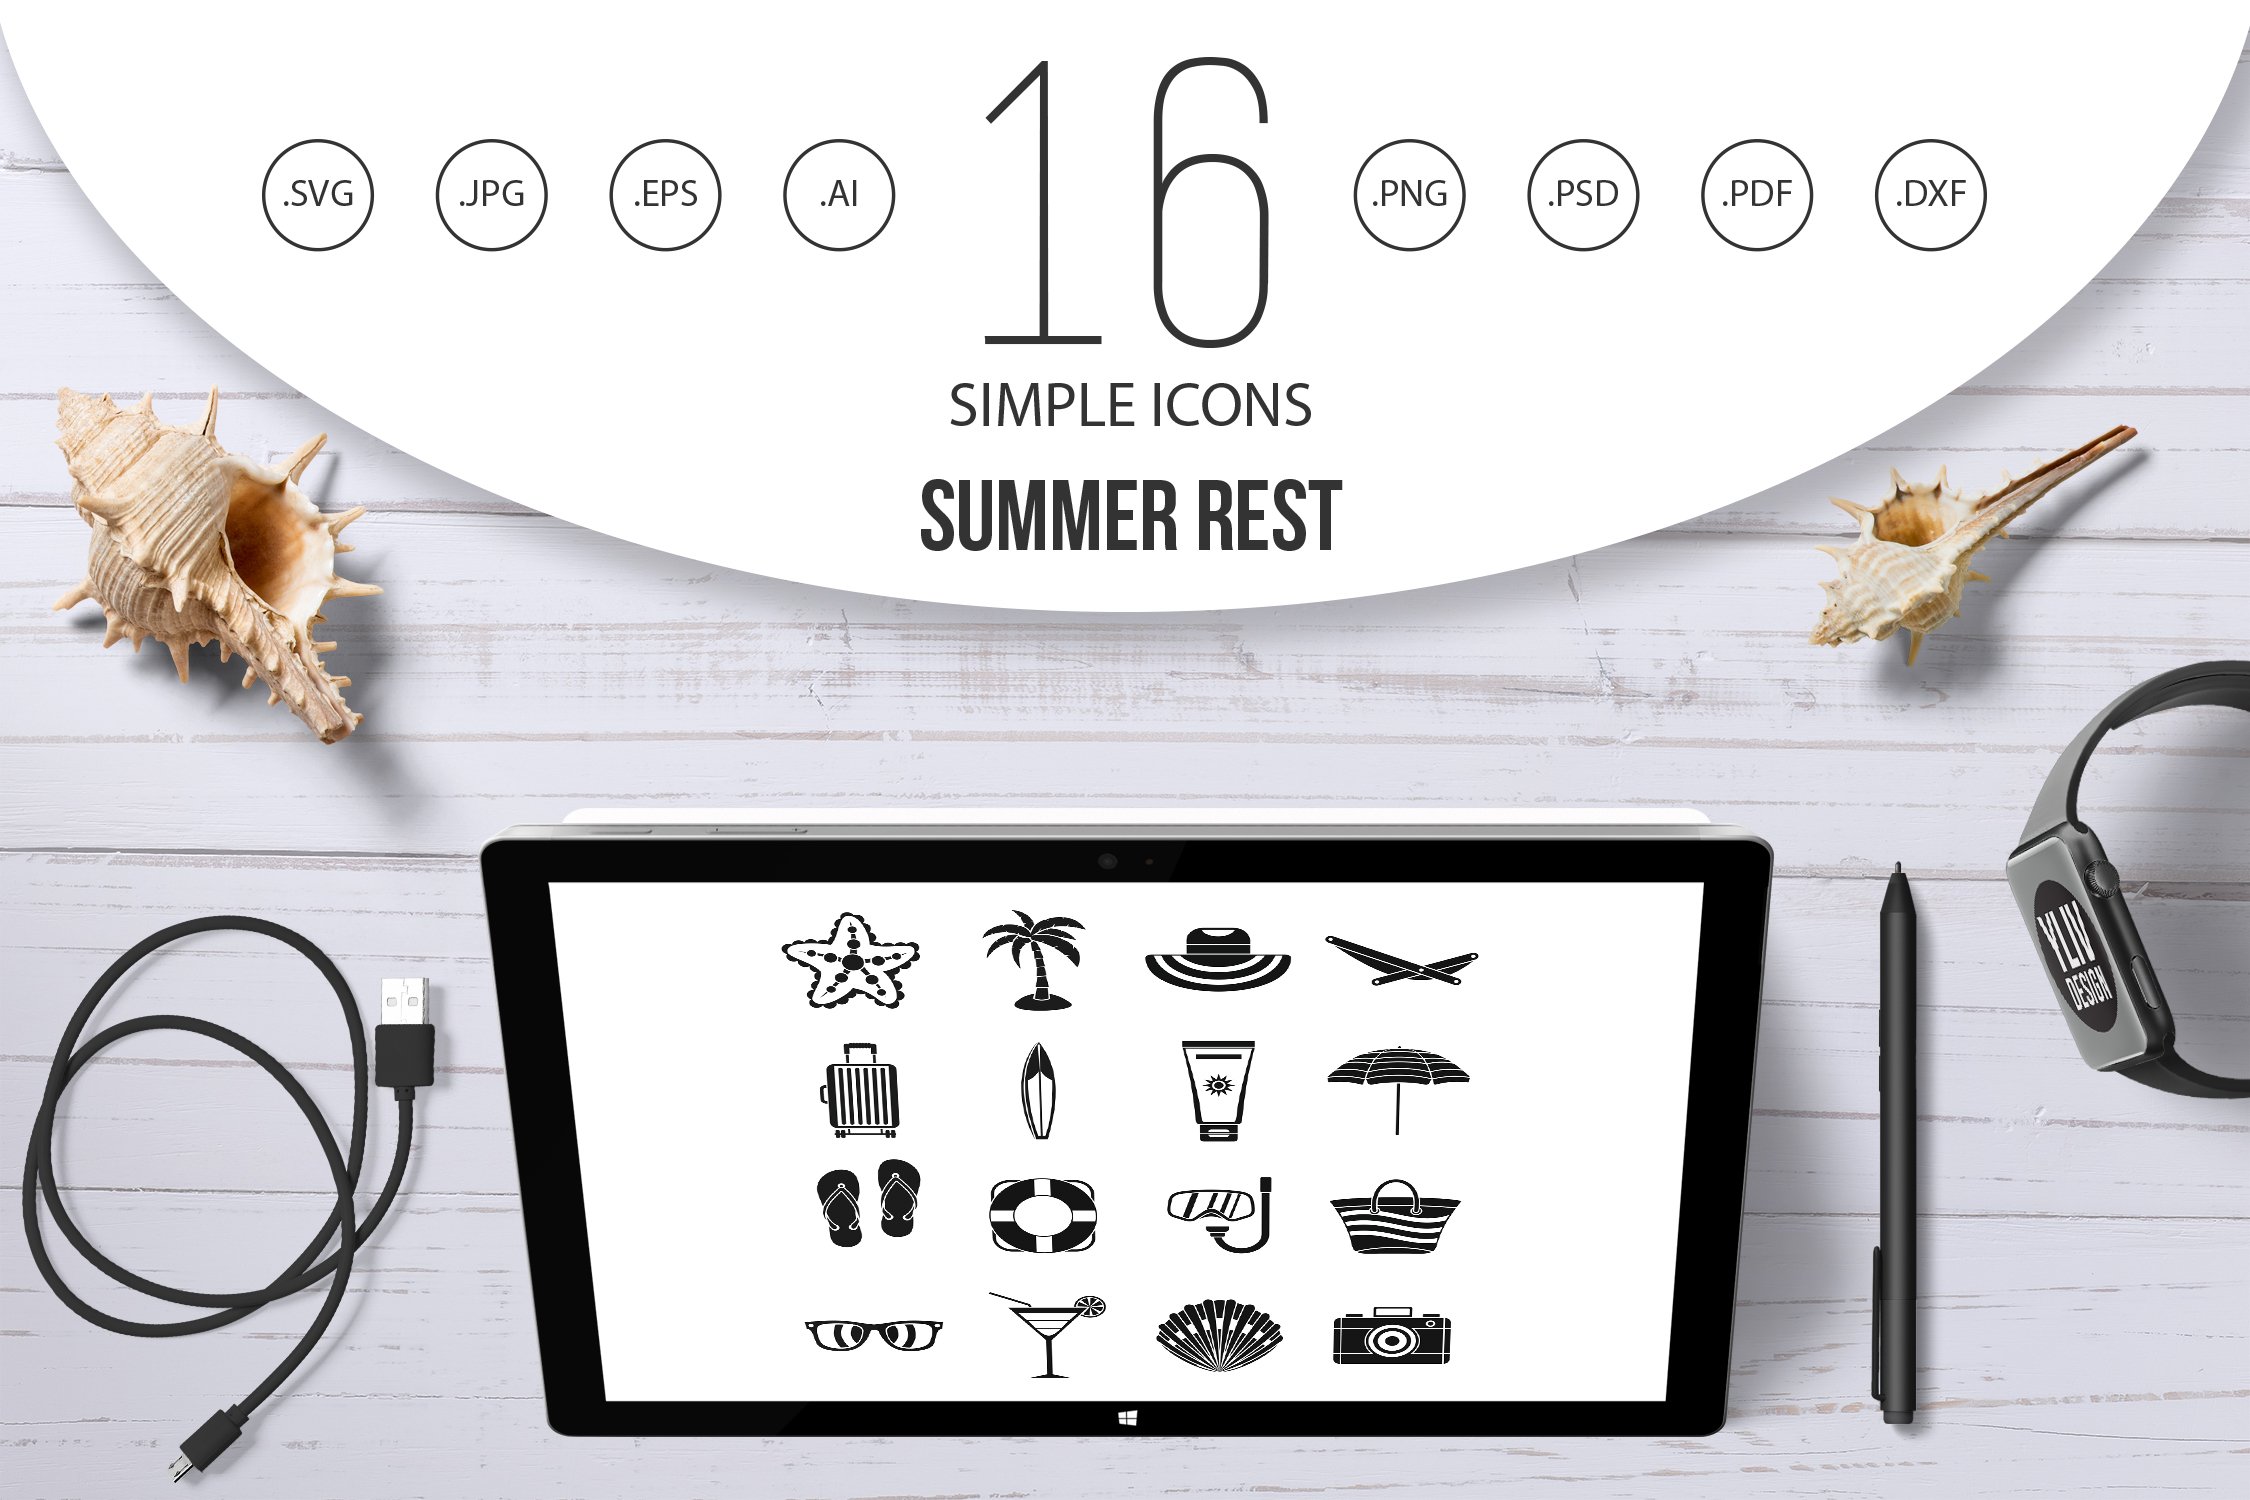 Summer rest icons set, simple style cover image.